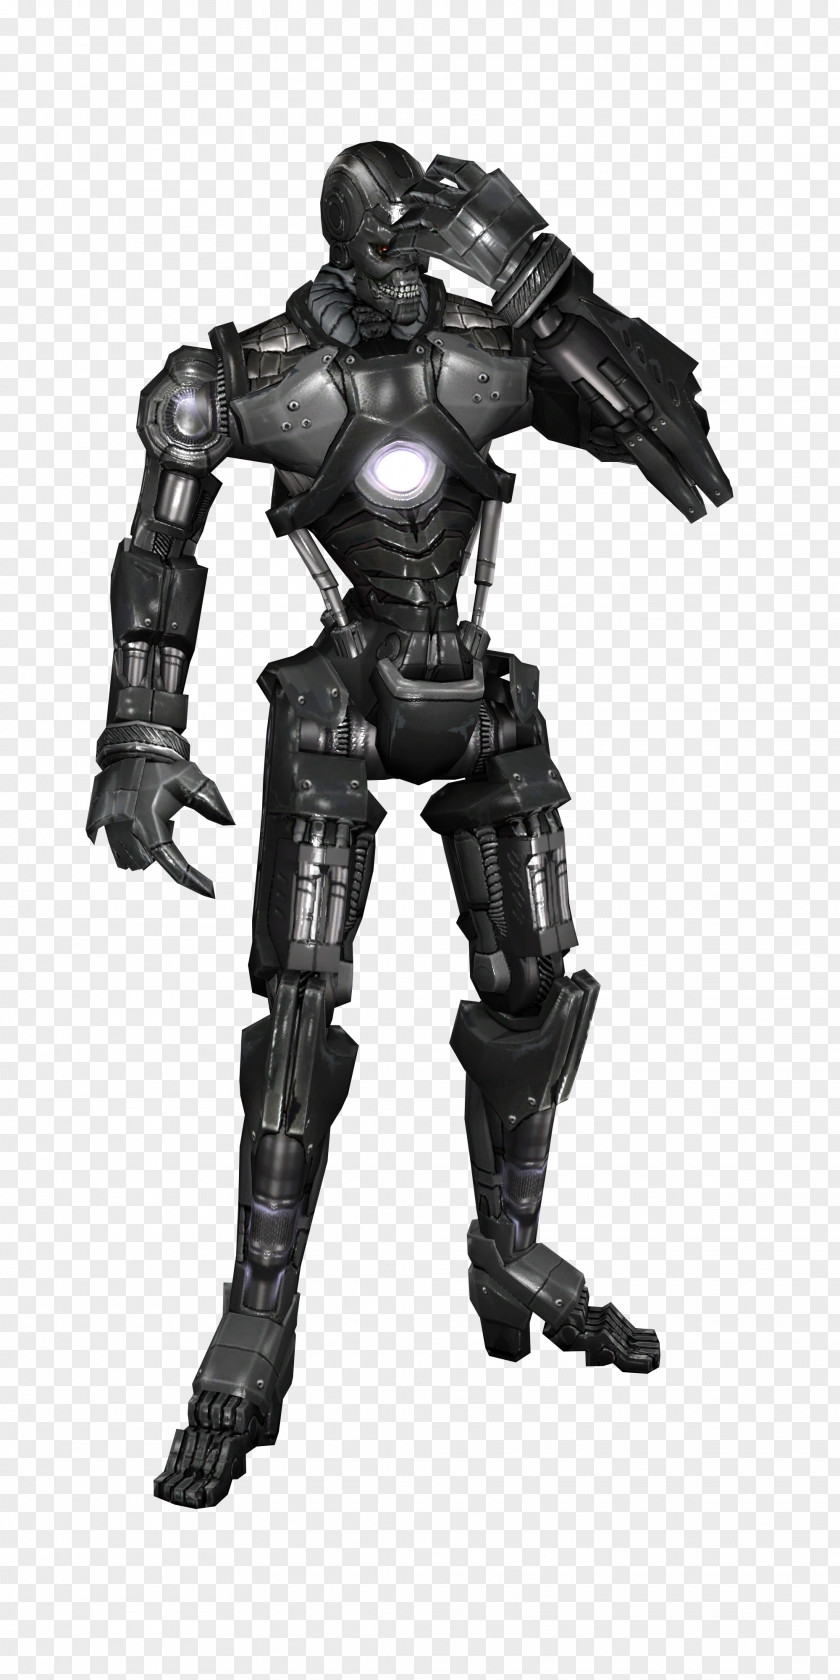 Terminator Real Steel Action & Toy Figures Robot Image PNG